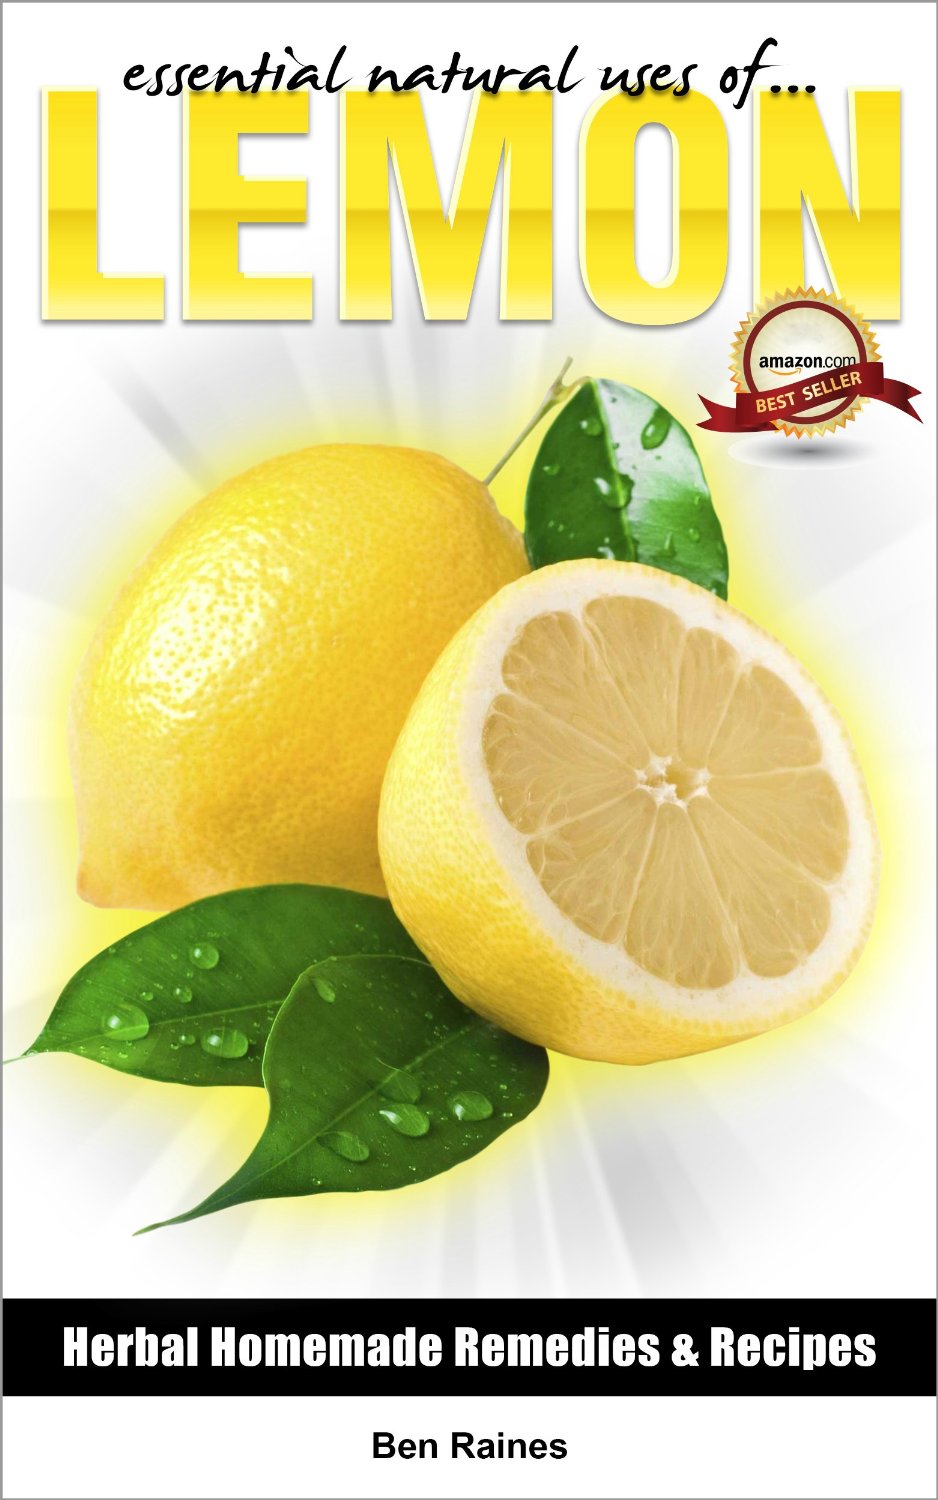 Essential Natural Uses Of….LEMON by Ben Raines